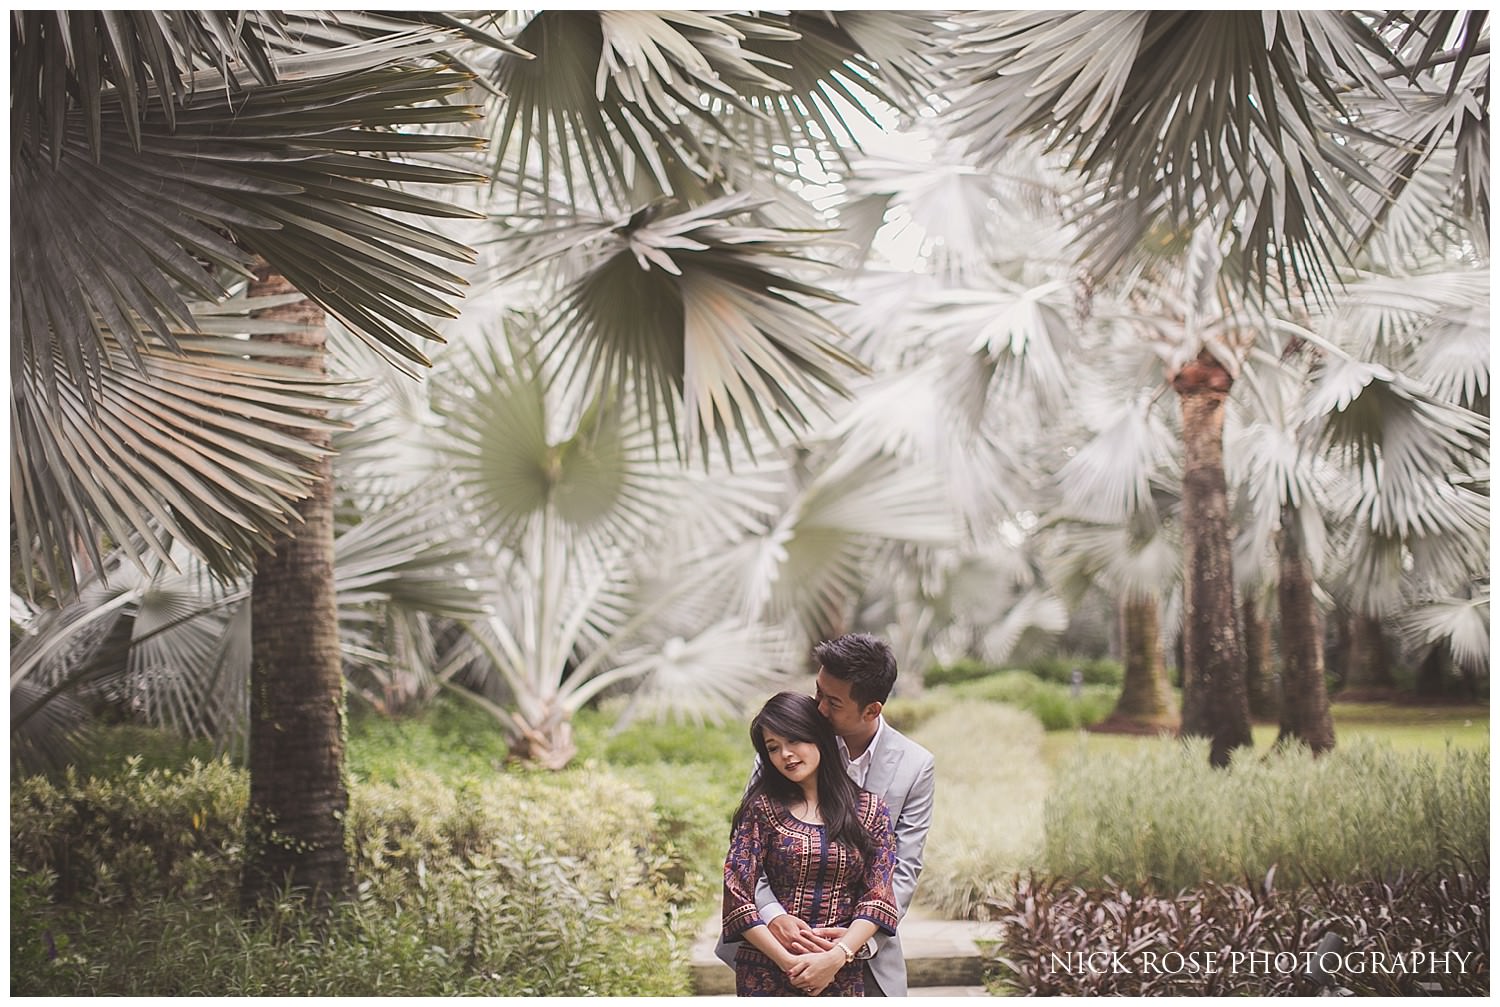  Pre wedding couple under palm trees at a Gardens by the Bay pre wedding photo shoot in Singapore 